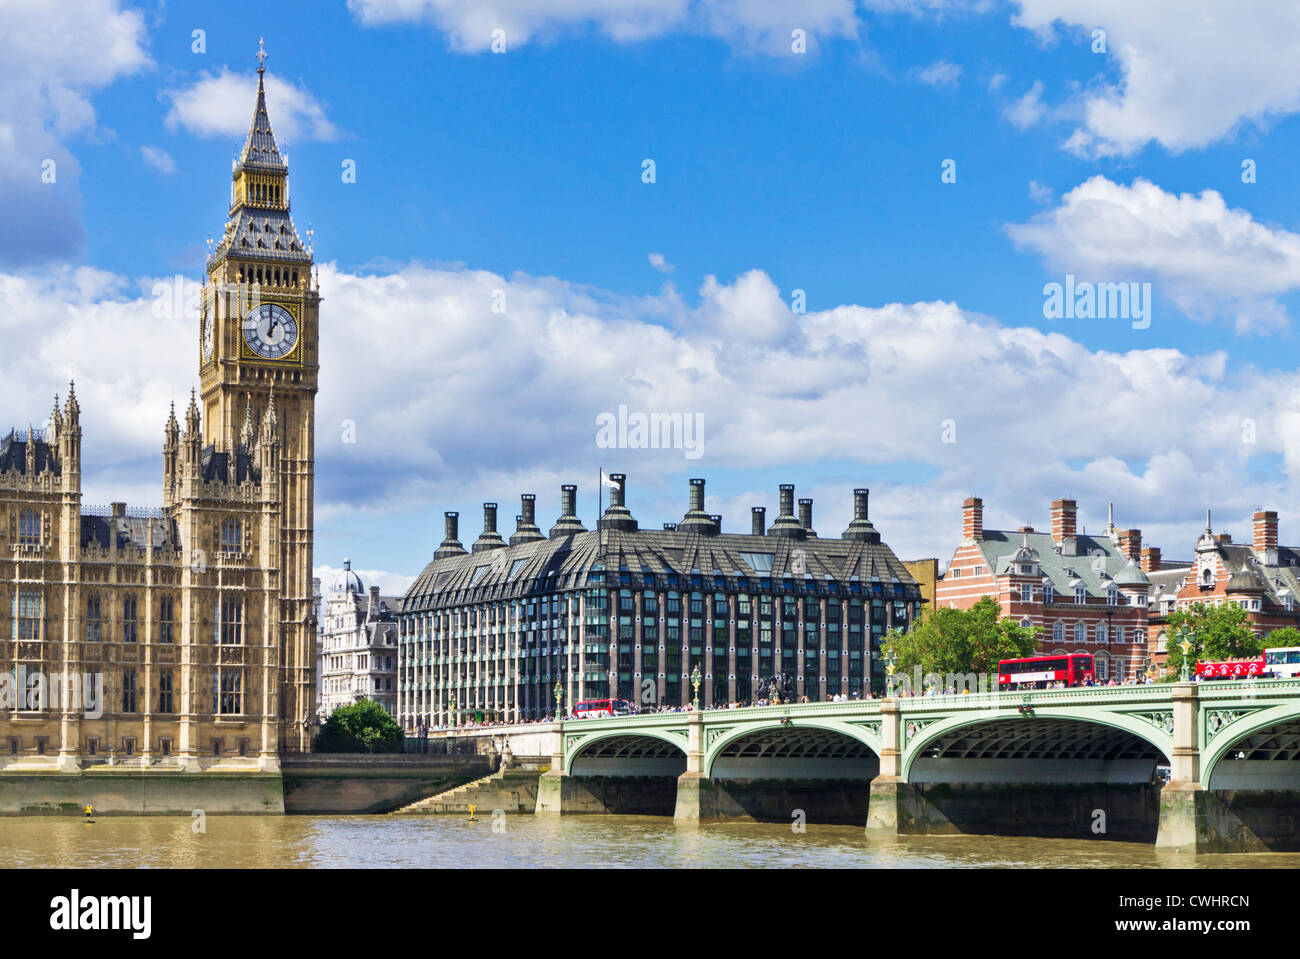 London Palace of Westminster Big Ben et trafic sur le pont Westminster Angleterre GB Royaume-Uni Europe Banque D'Images